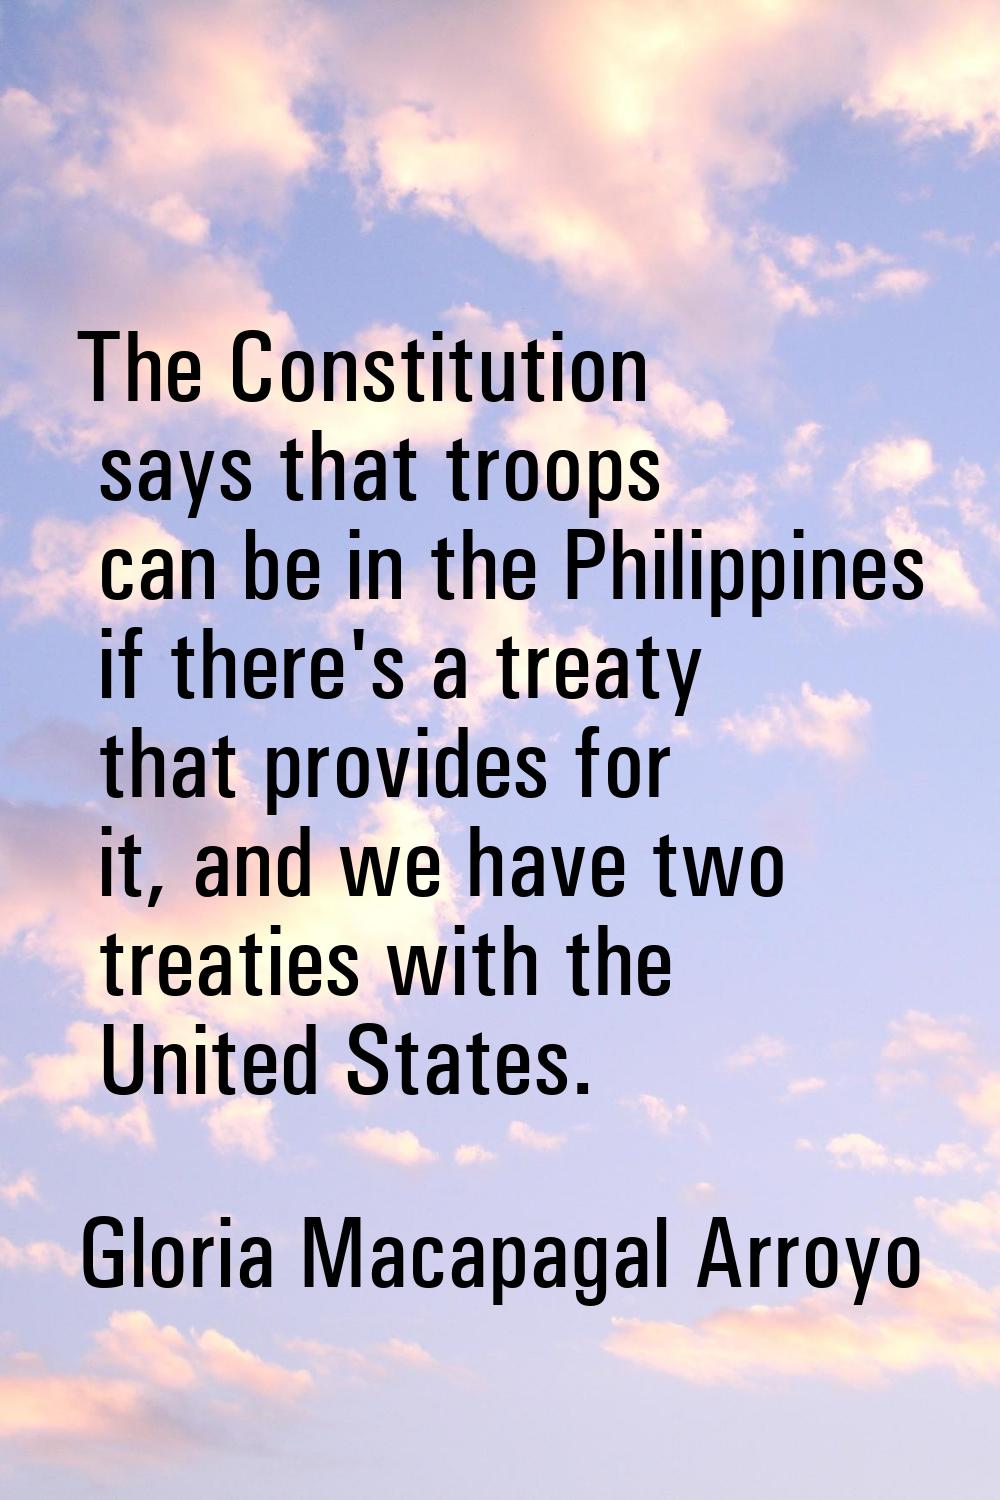 The Constitution says that troops can be in the Philippines if there's a treaty that provides for i